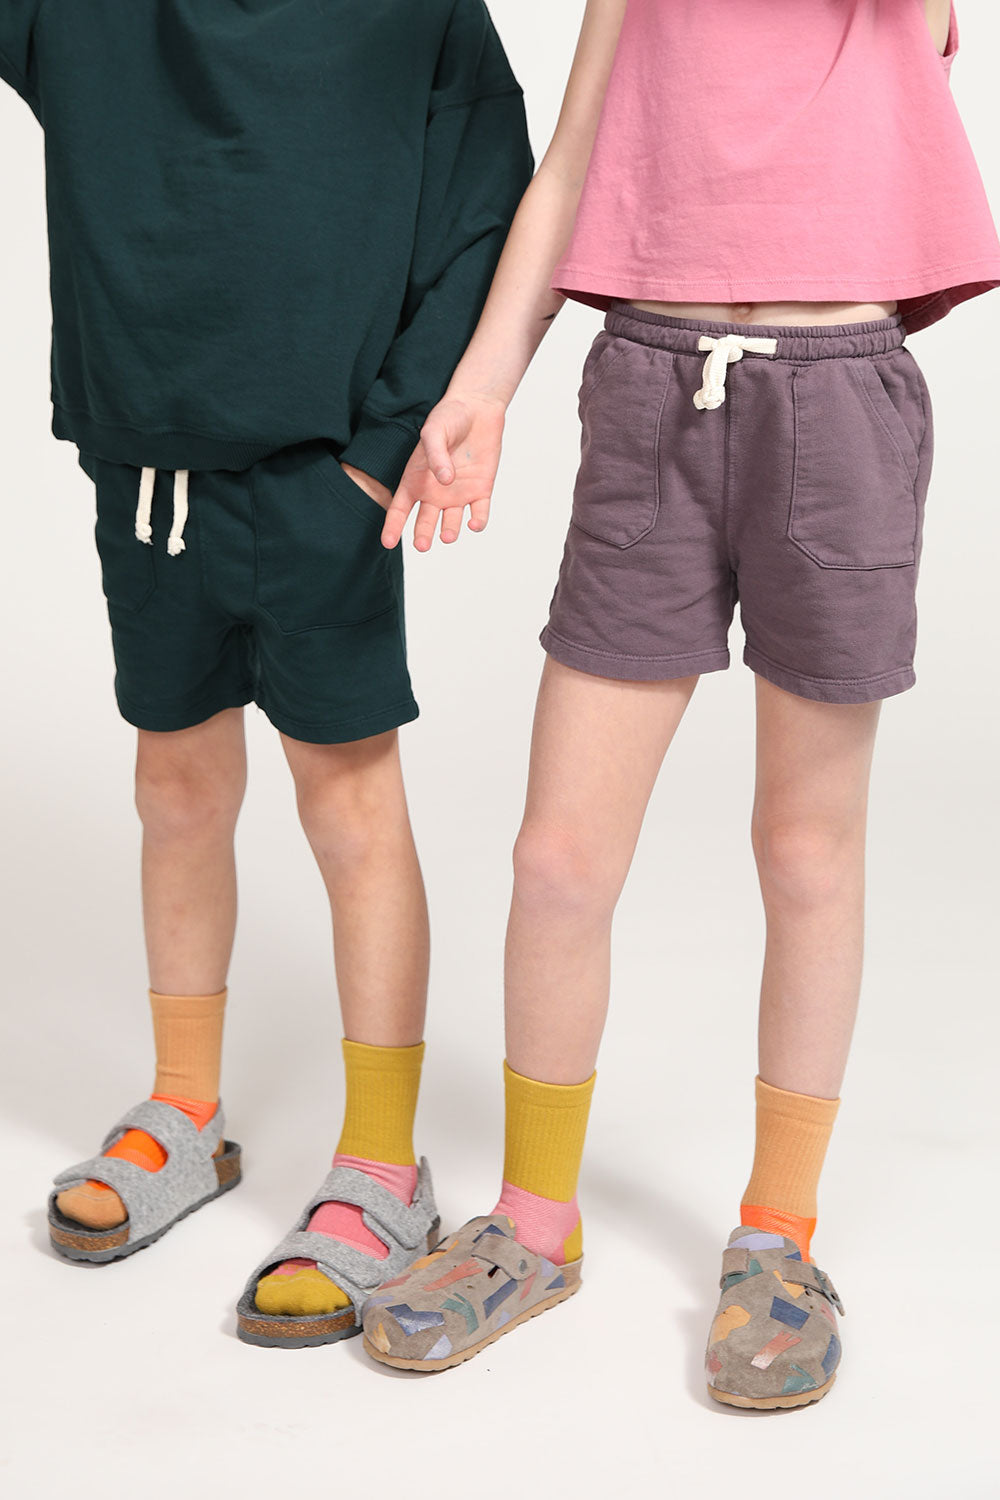 A young boy and girl wearing crew socks from Everyway kids activewear.